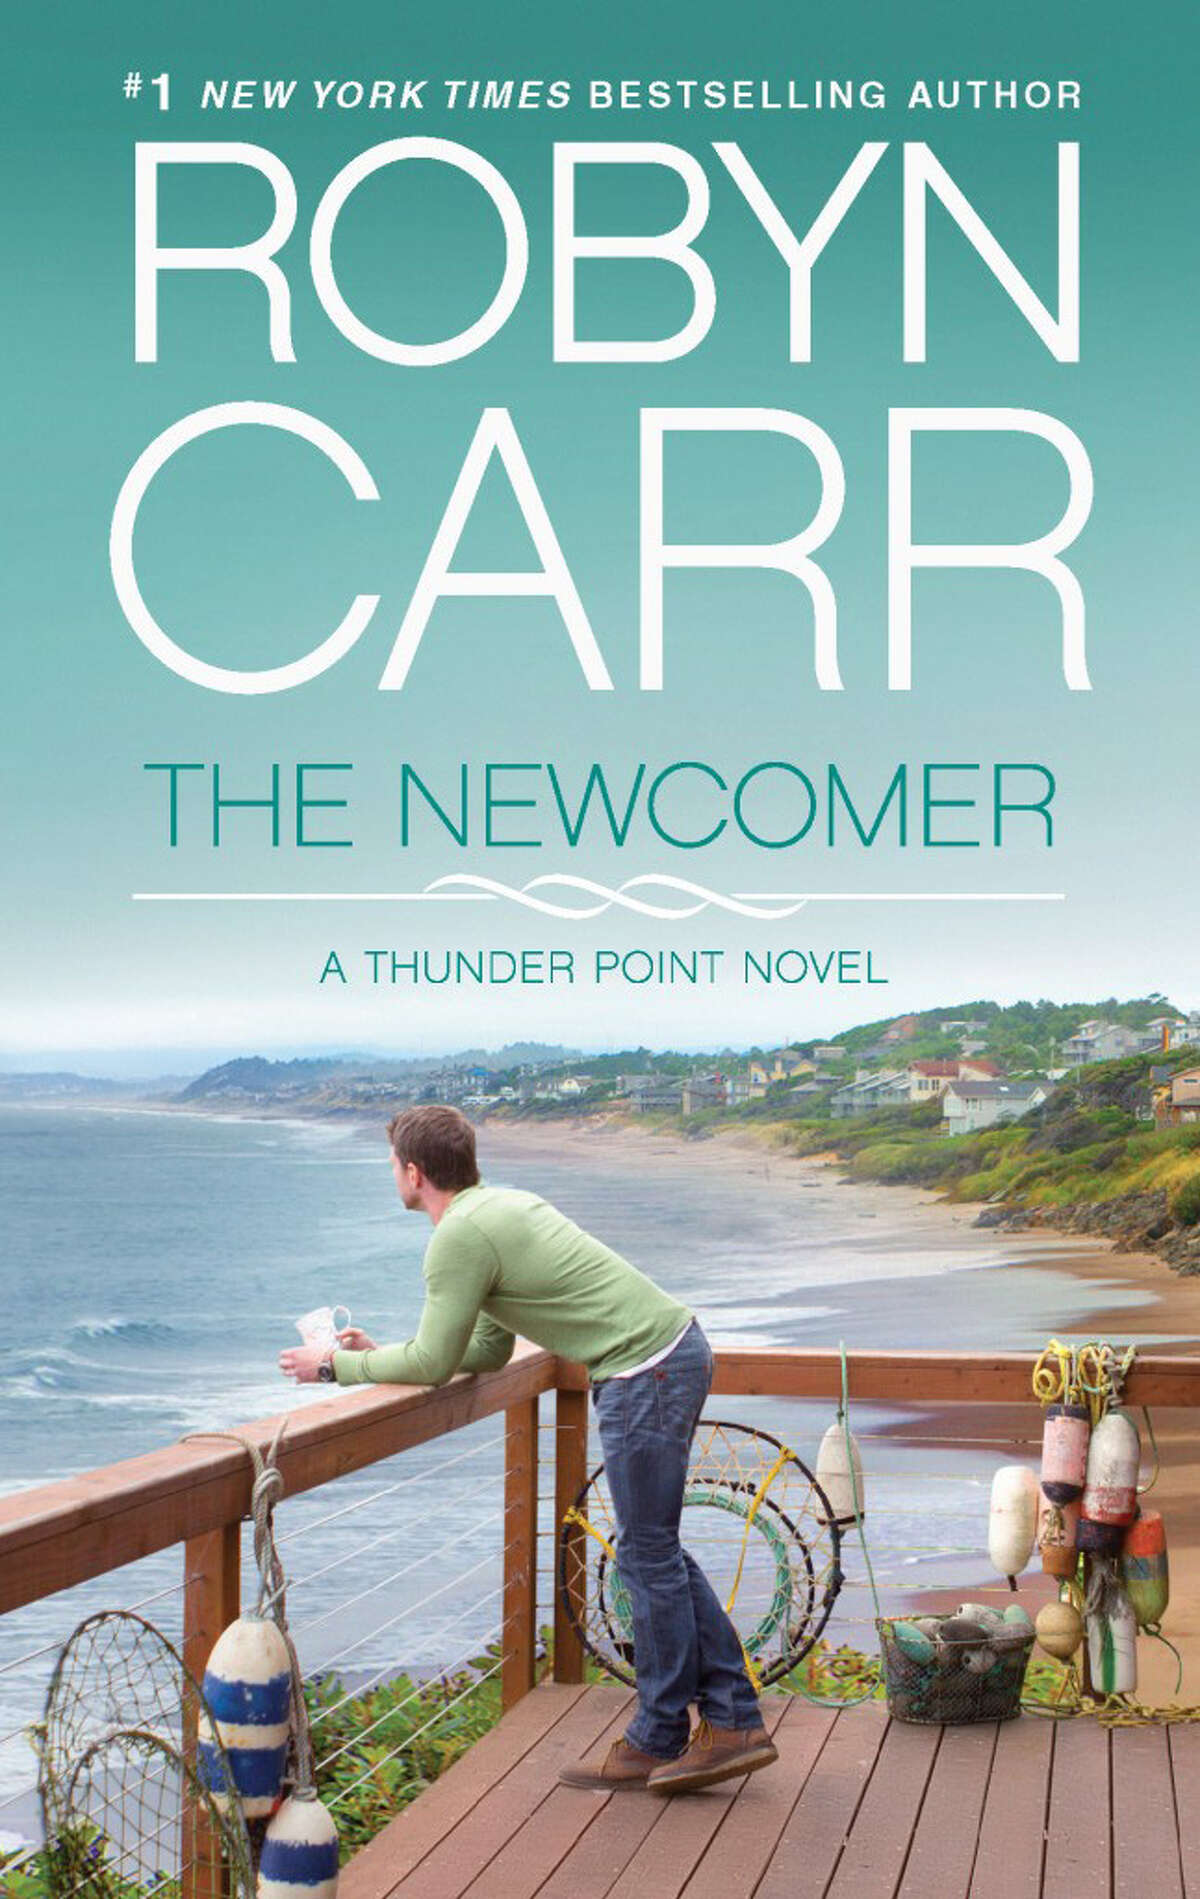 THE NEWCOMER, by Robyn Carr